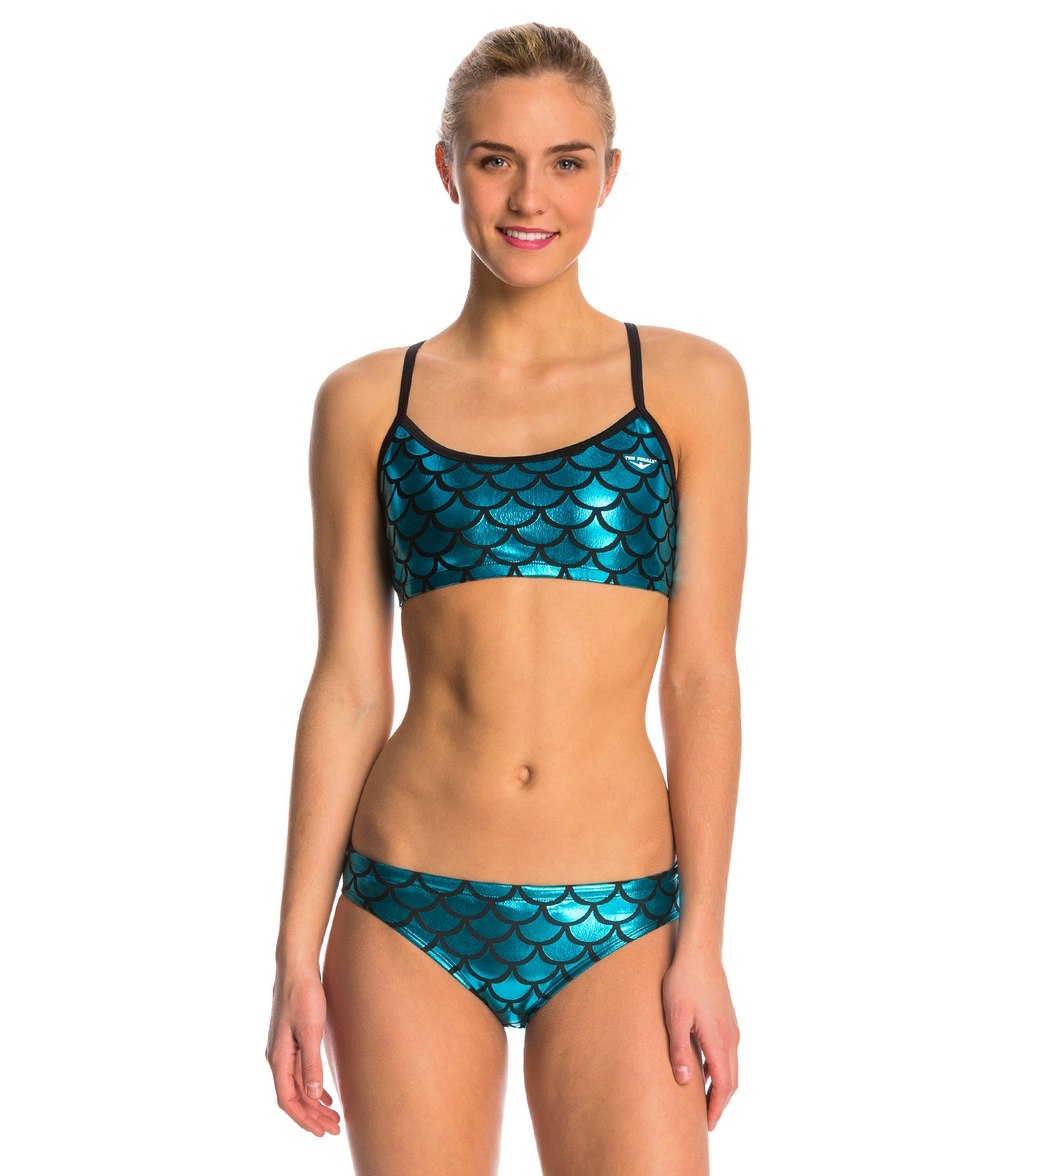 The Finals Funnies Mermaid Workout Two Piece Bikini Swimsuit Set At Swimoutlet Com